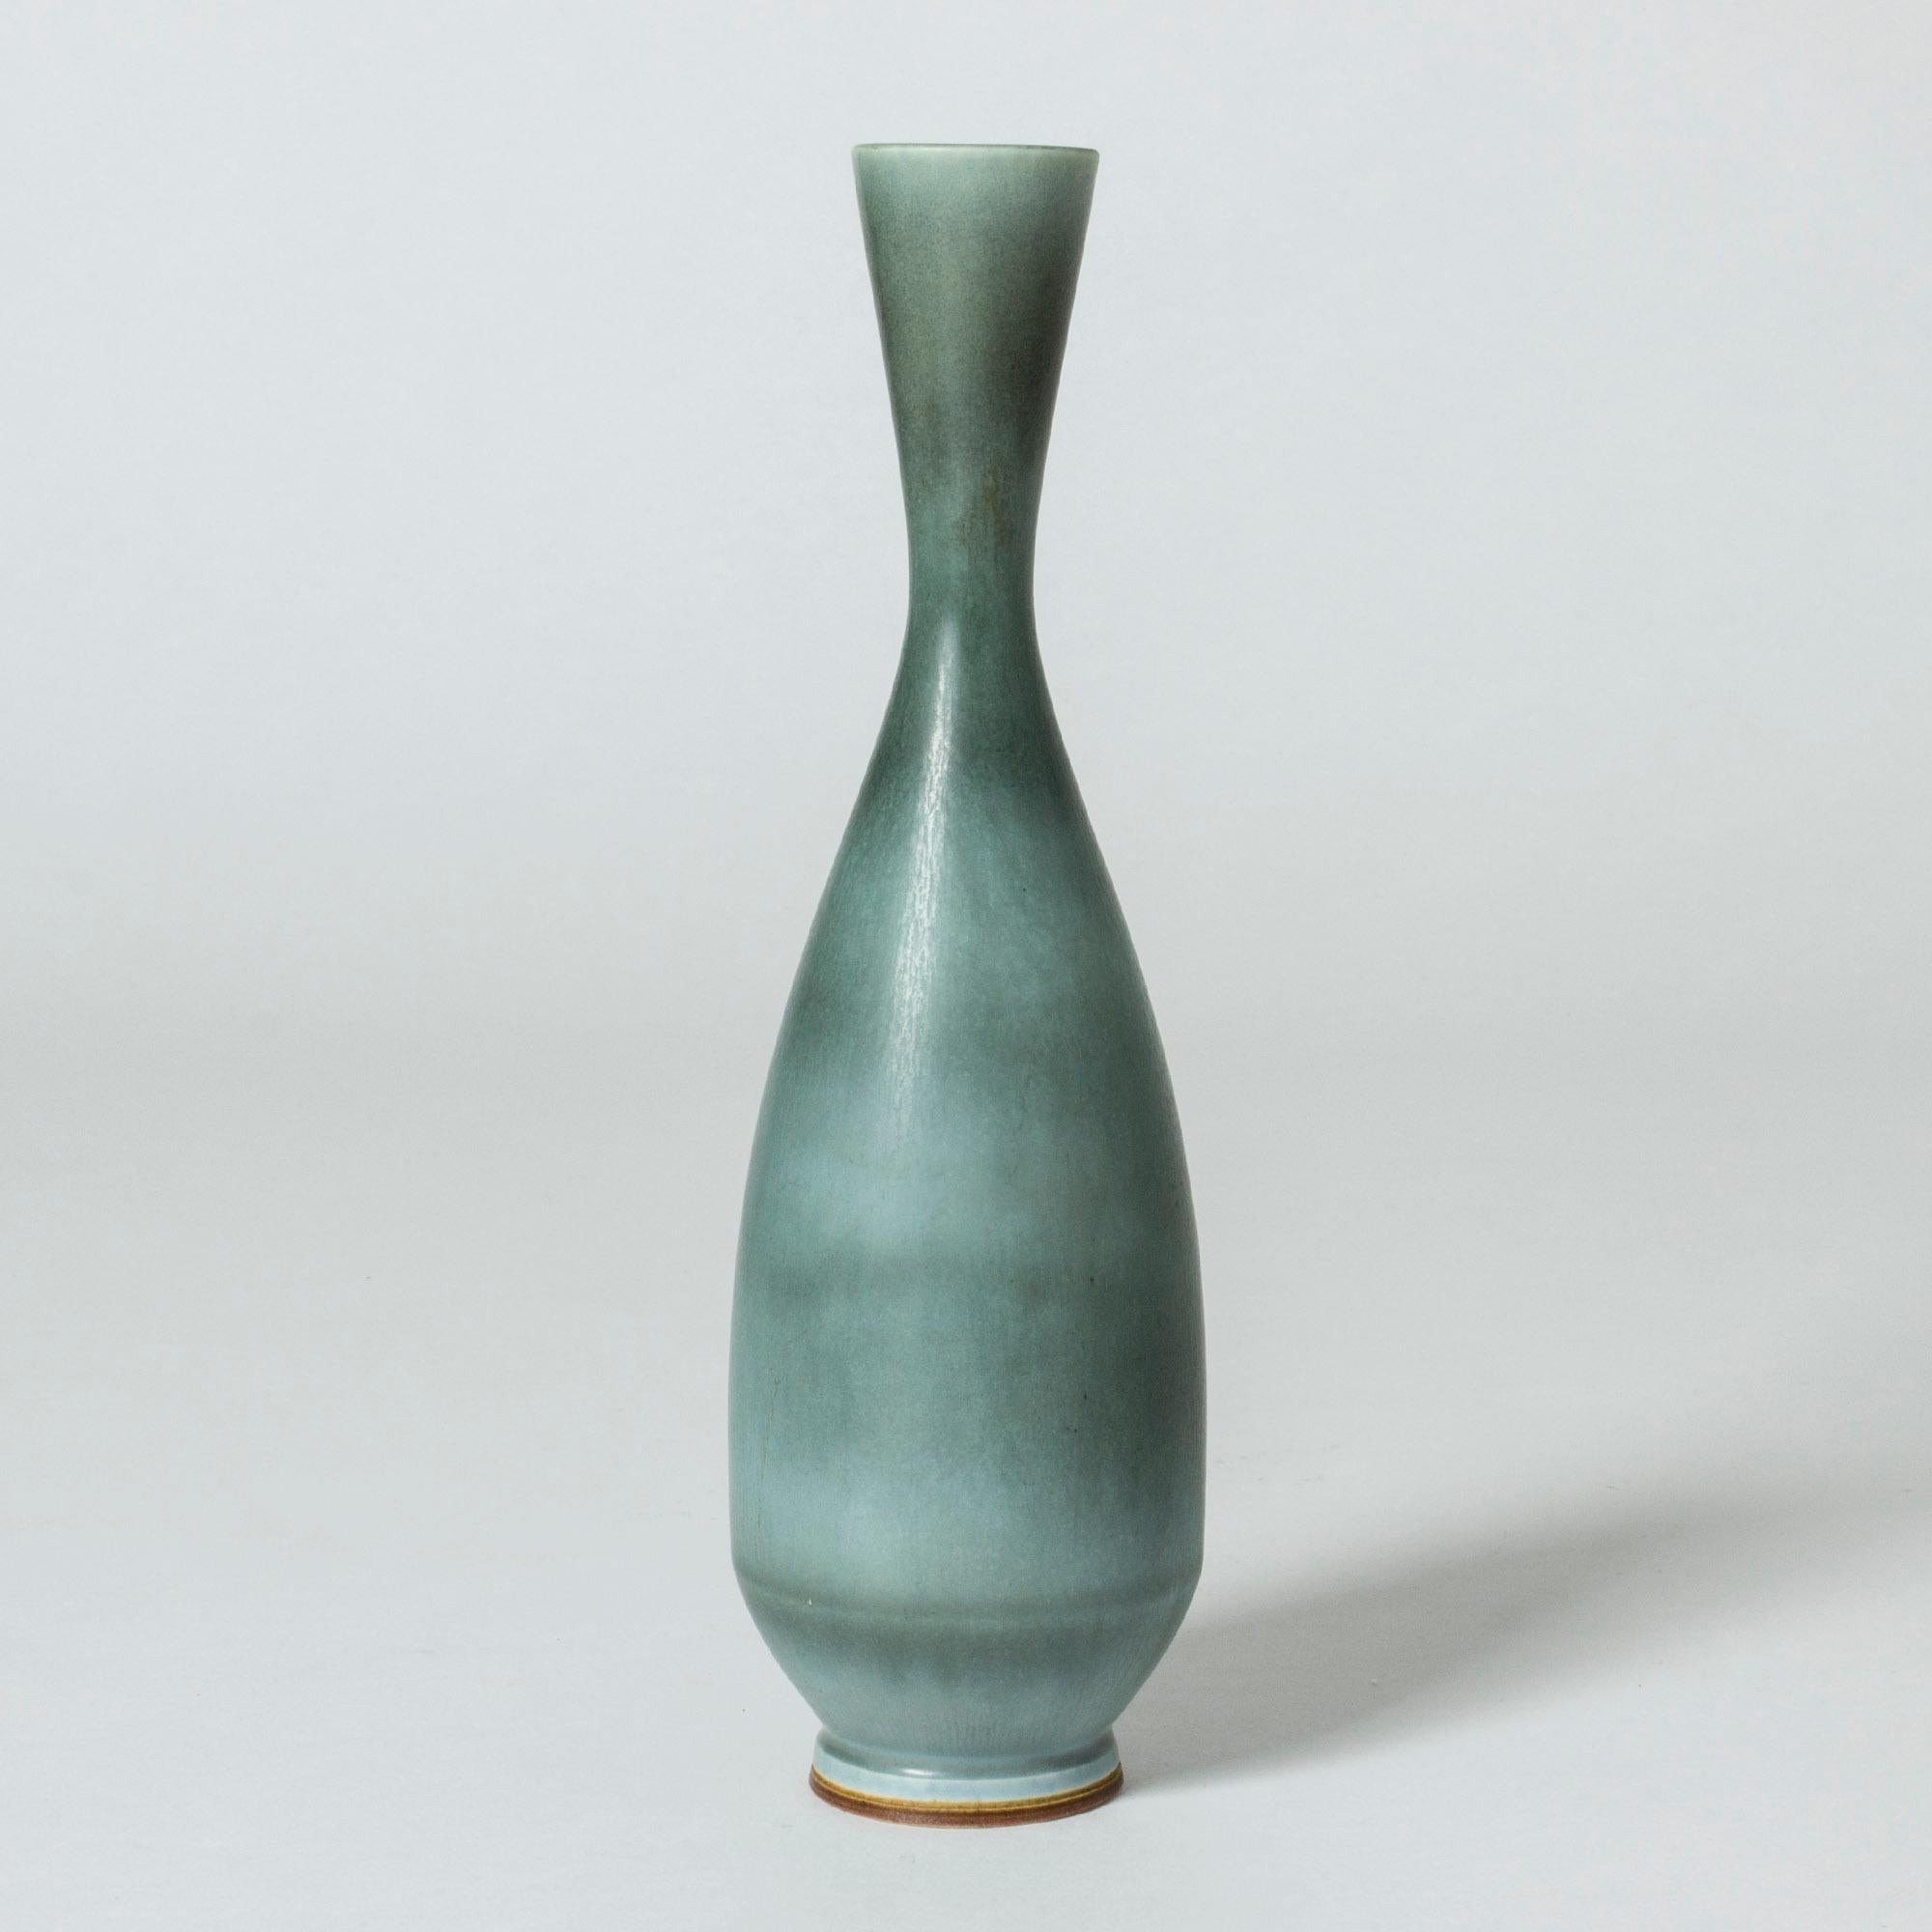 Beautiful stoneware vase by Berndt Friberg with ocean blue glaze with variation between dark and lighter hues.